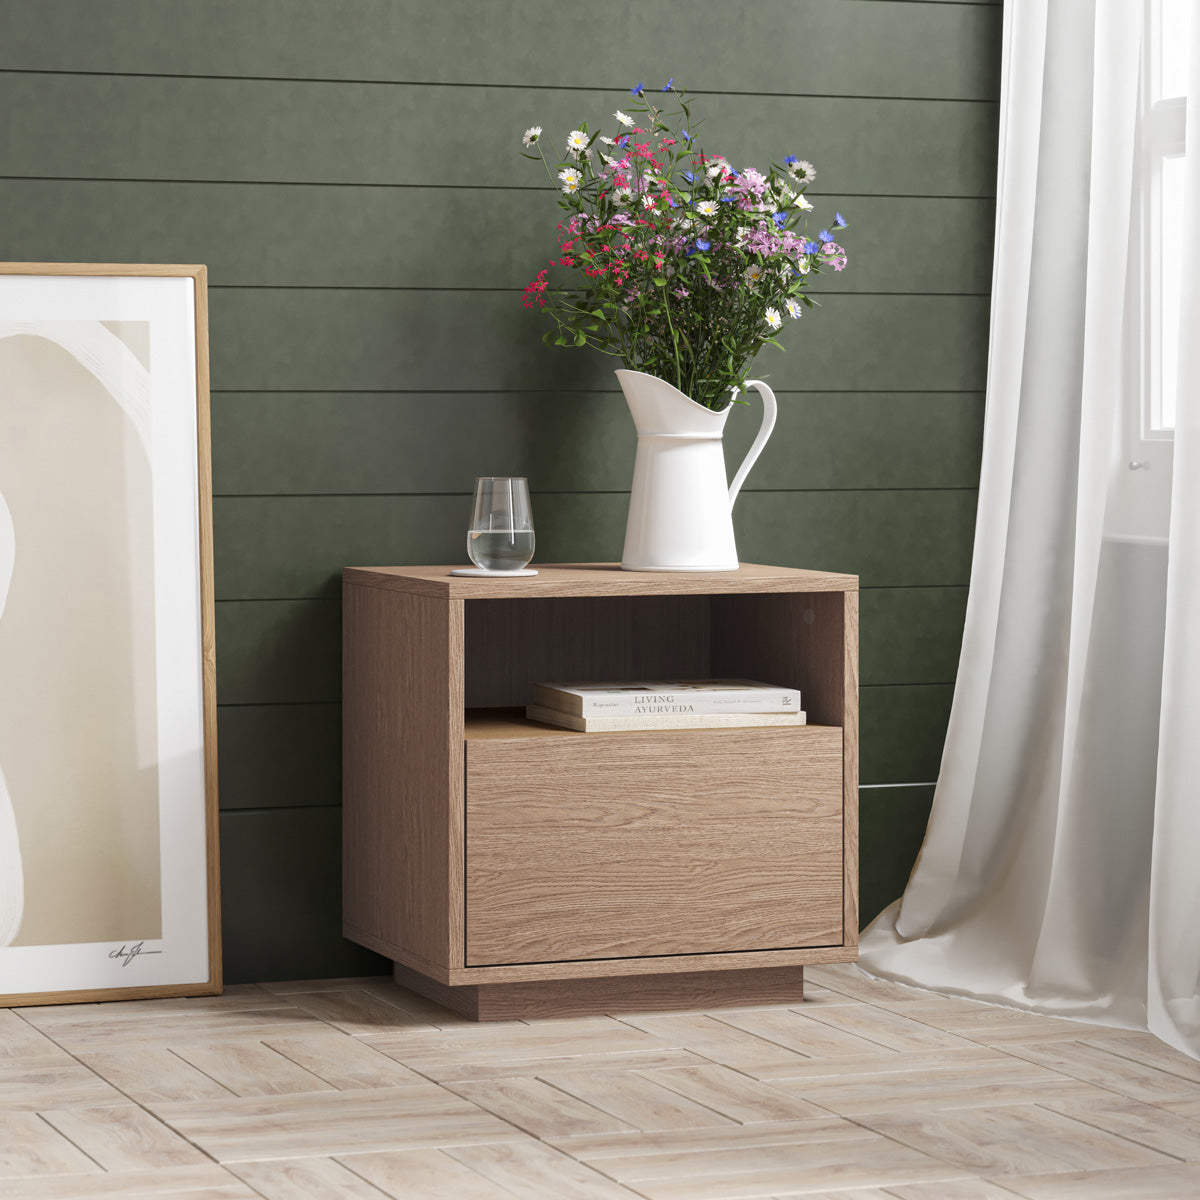 Bedside Table With Storage Drawer (Urban, Oak Colour)